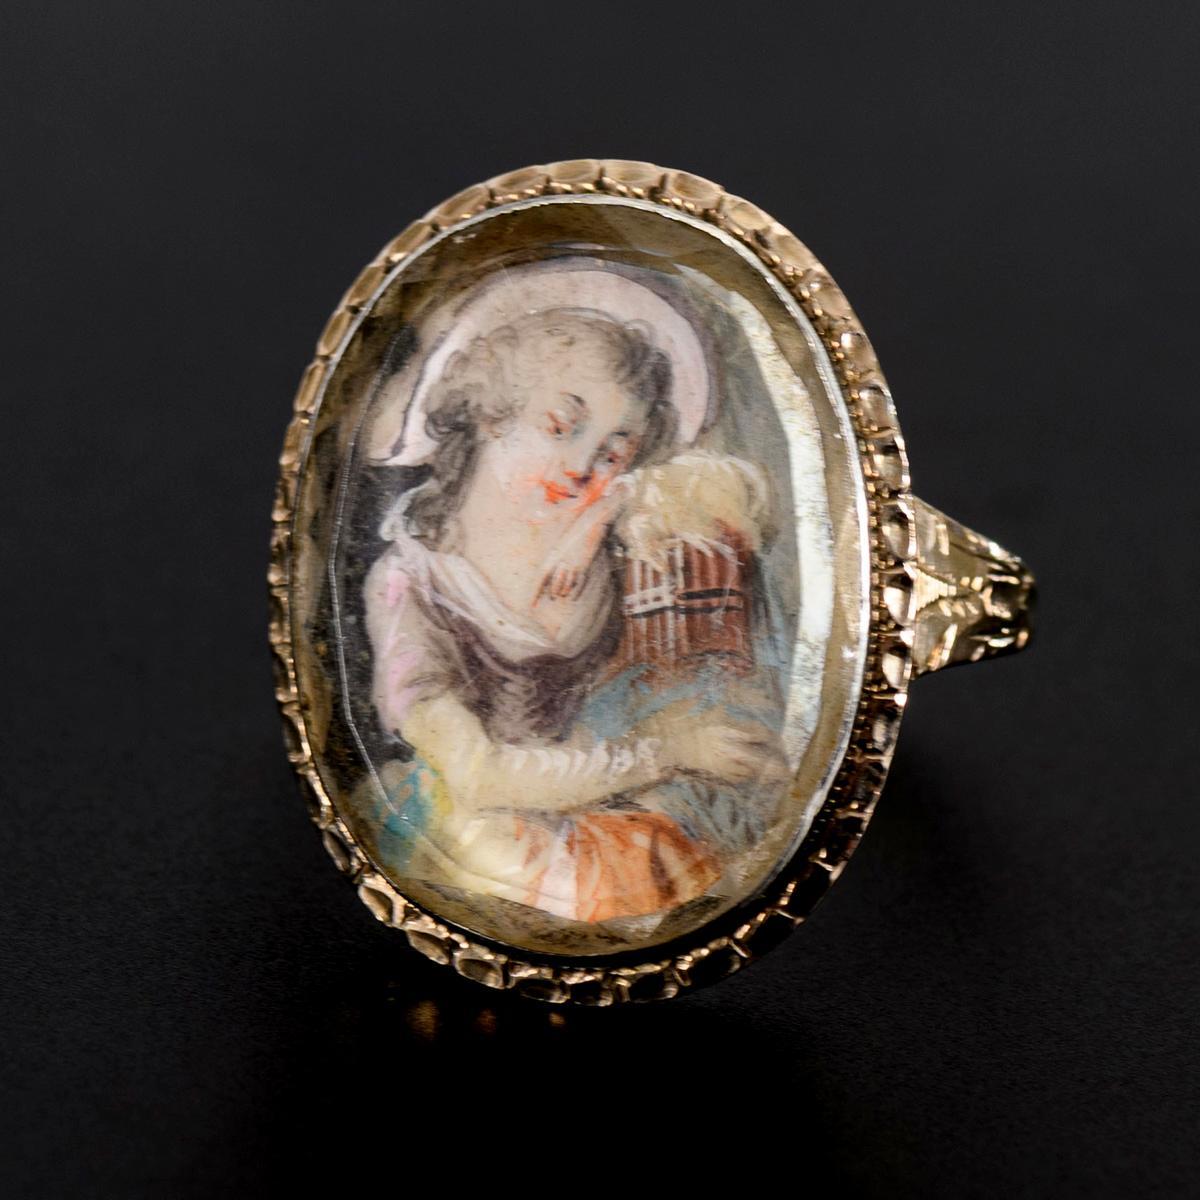 An extremely well-preserved Georgian miniature portrait of a young lady holding a bird cage. This unique ring dates circa 1780's and comes from a private collection in Germany. It will celebrate it;s 150th birthday in only 7 years from now!

The